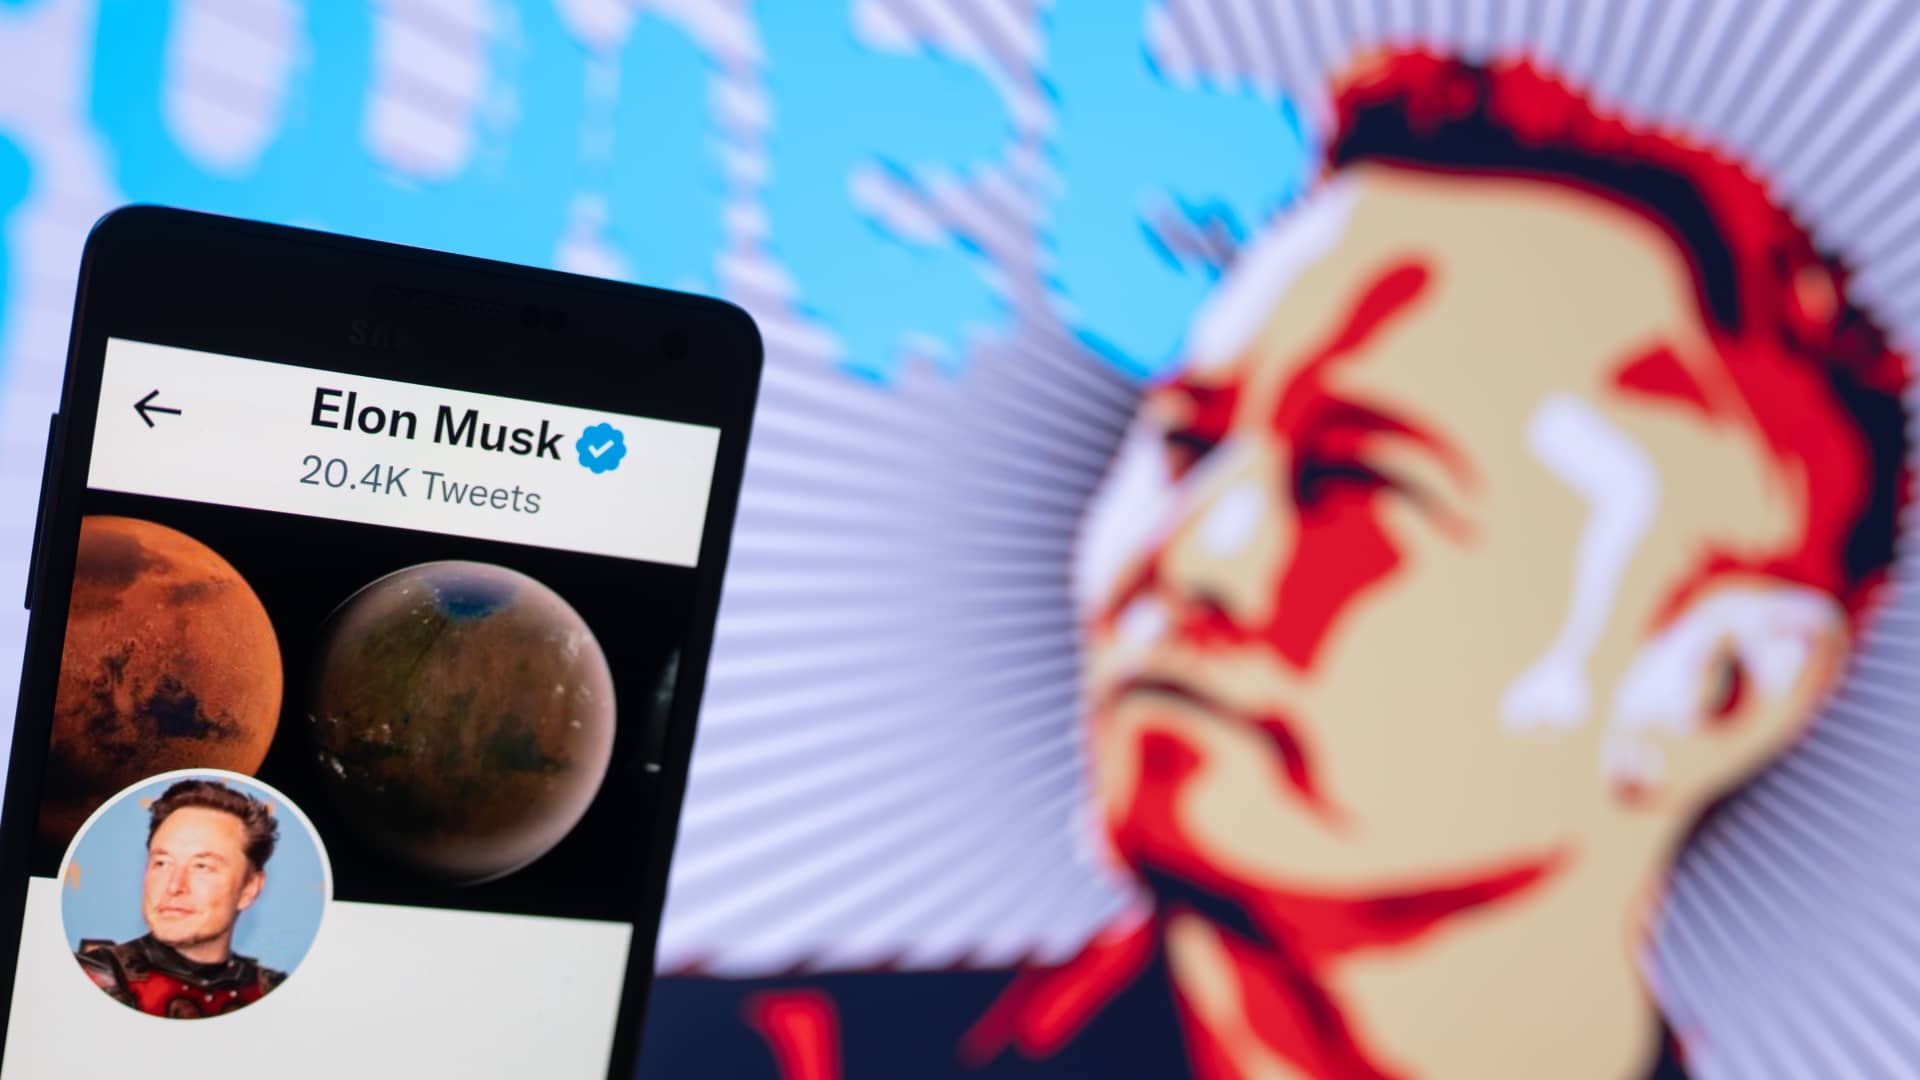 Twitter stops policing Covid-19 misinformation under CEO Elon Musk and reportedly restores 62,000 suspended accounts